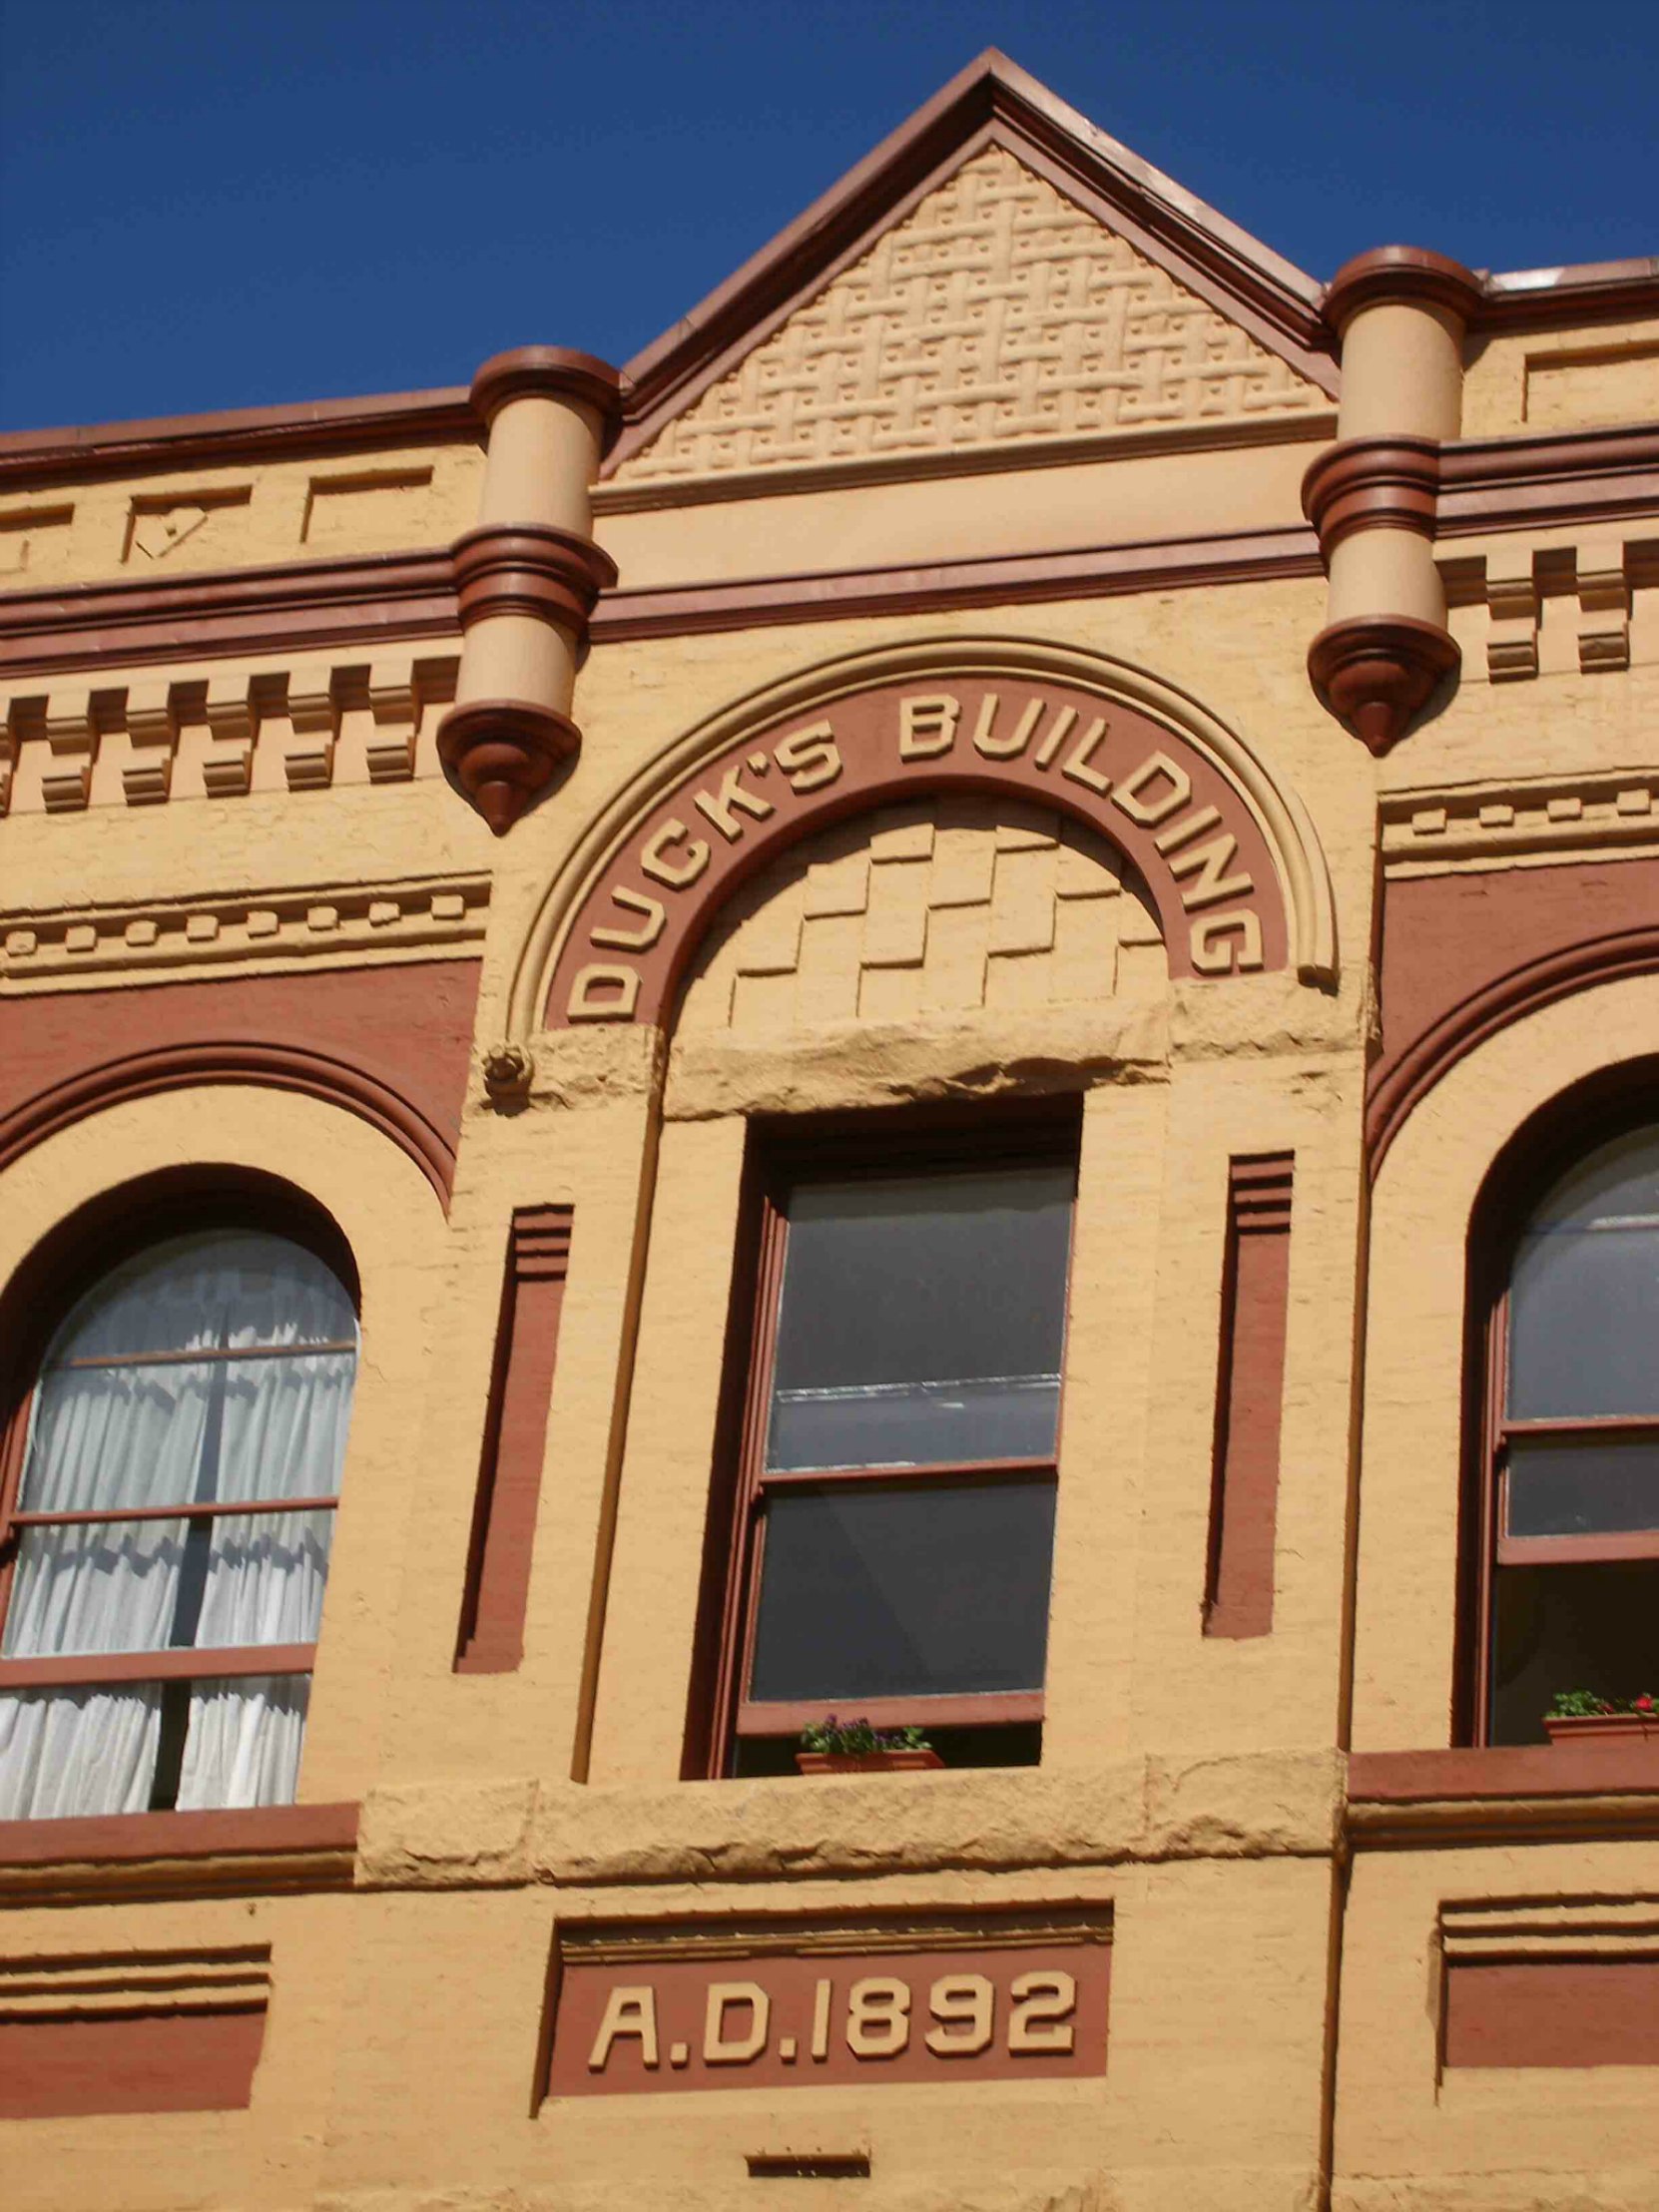 Detail on Duck's Building, Broad Street, Victoria, B.C. Built in 1892 for Simeon Duck.